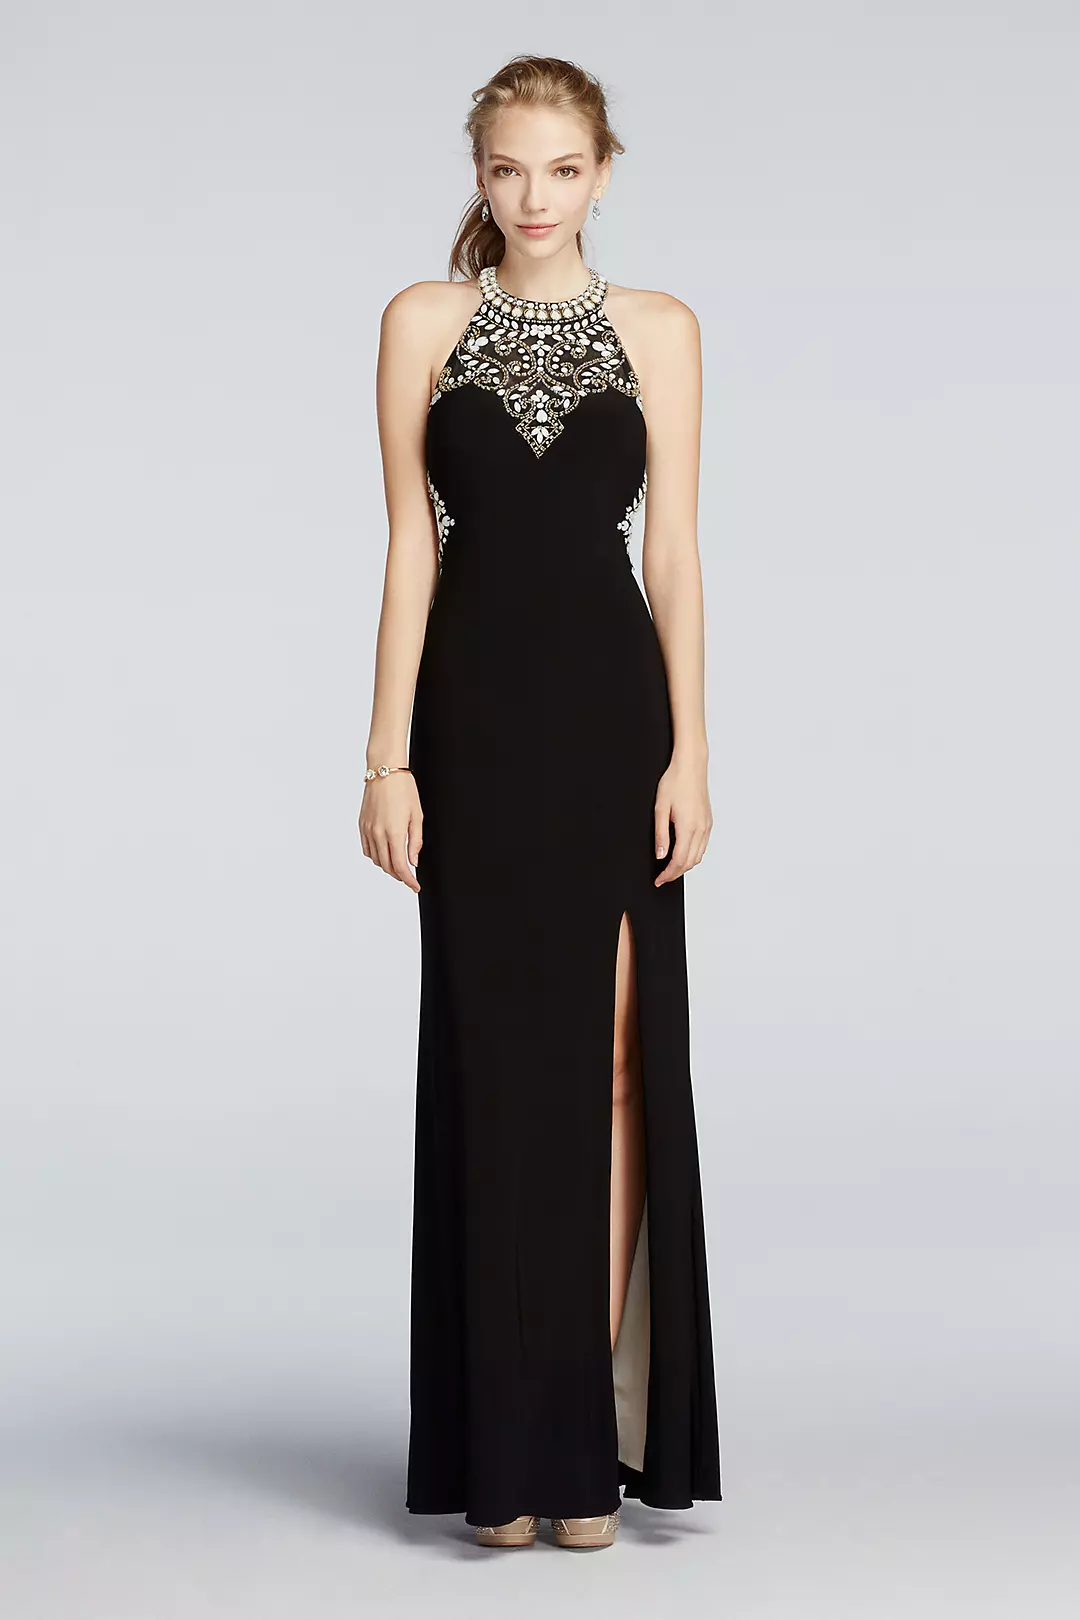 Beaded High Neck Cut Out Jersey Prom Dress | David's Bridal